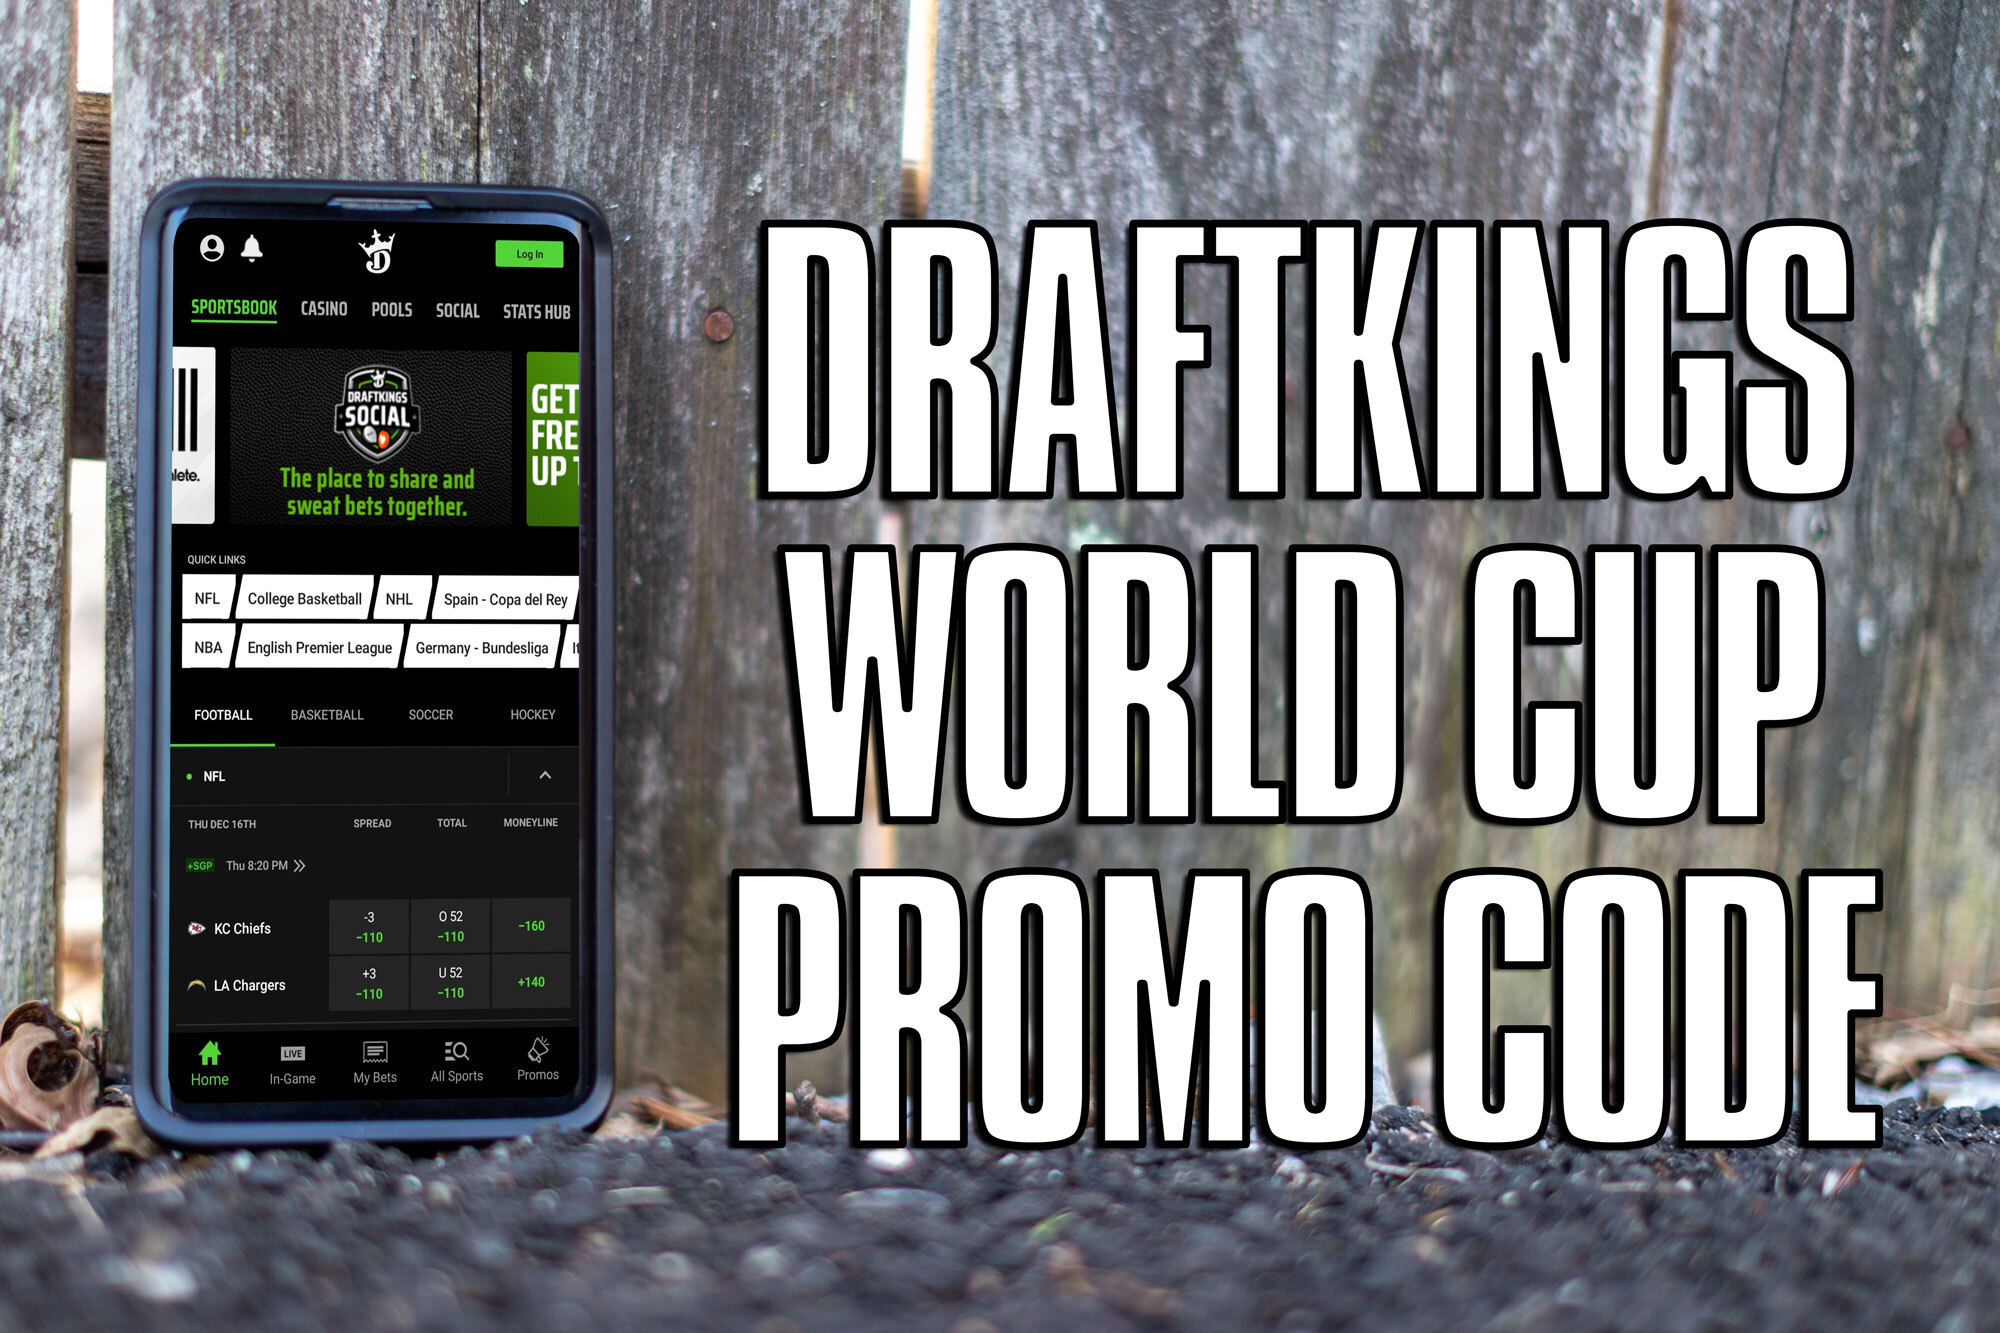 FIFA World Cup final: When will 2022 final take place? - DraftKings Network